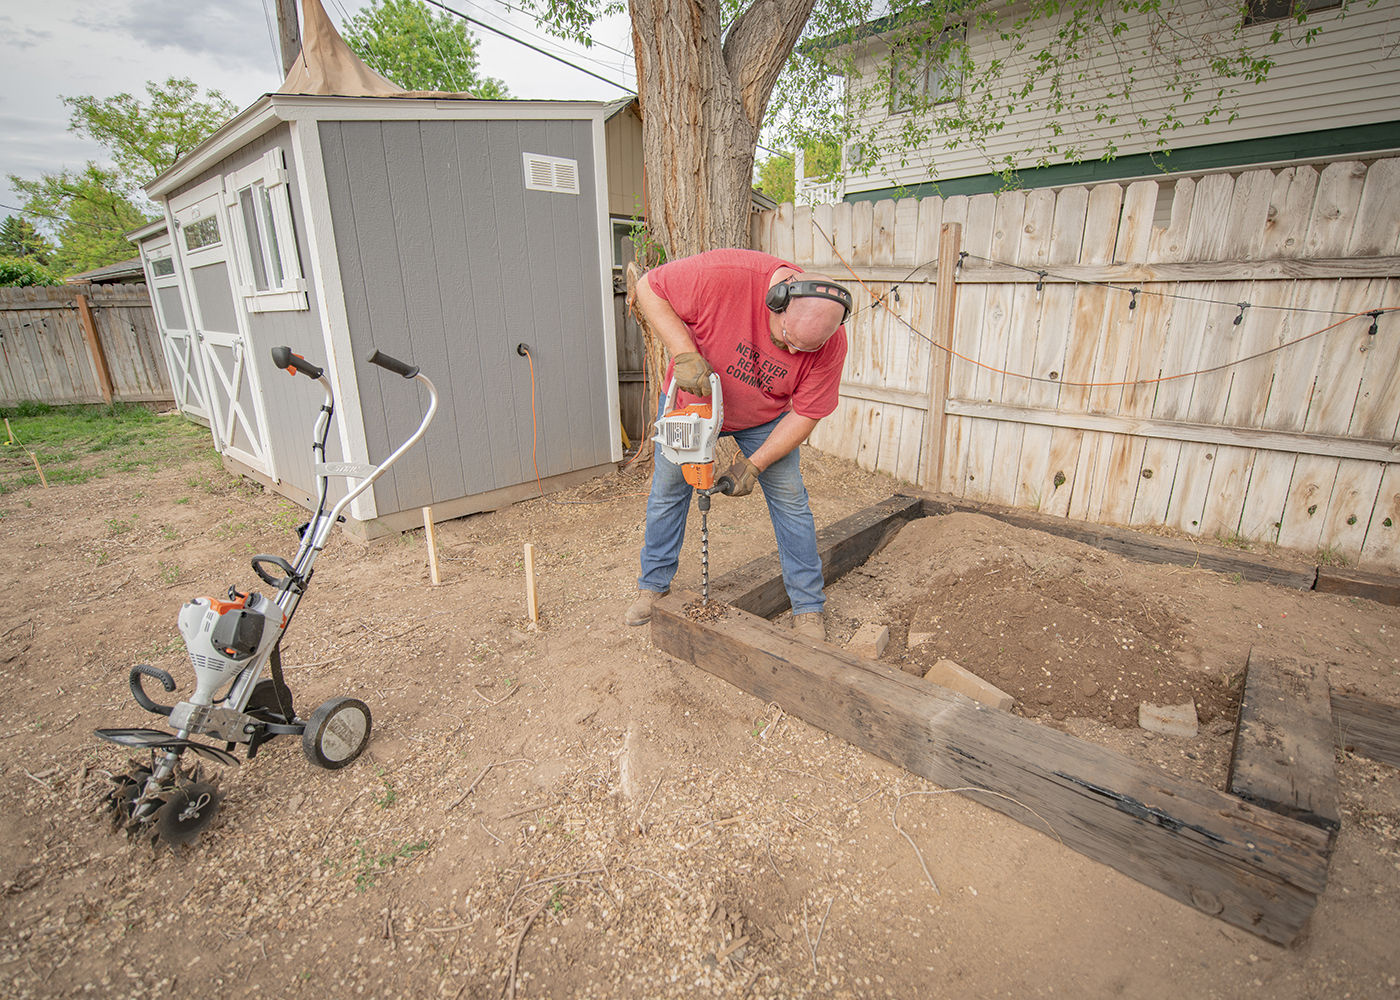 Nate day using bt 45 to anchor down railroad ties in barckyard remodel for backyard smokers